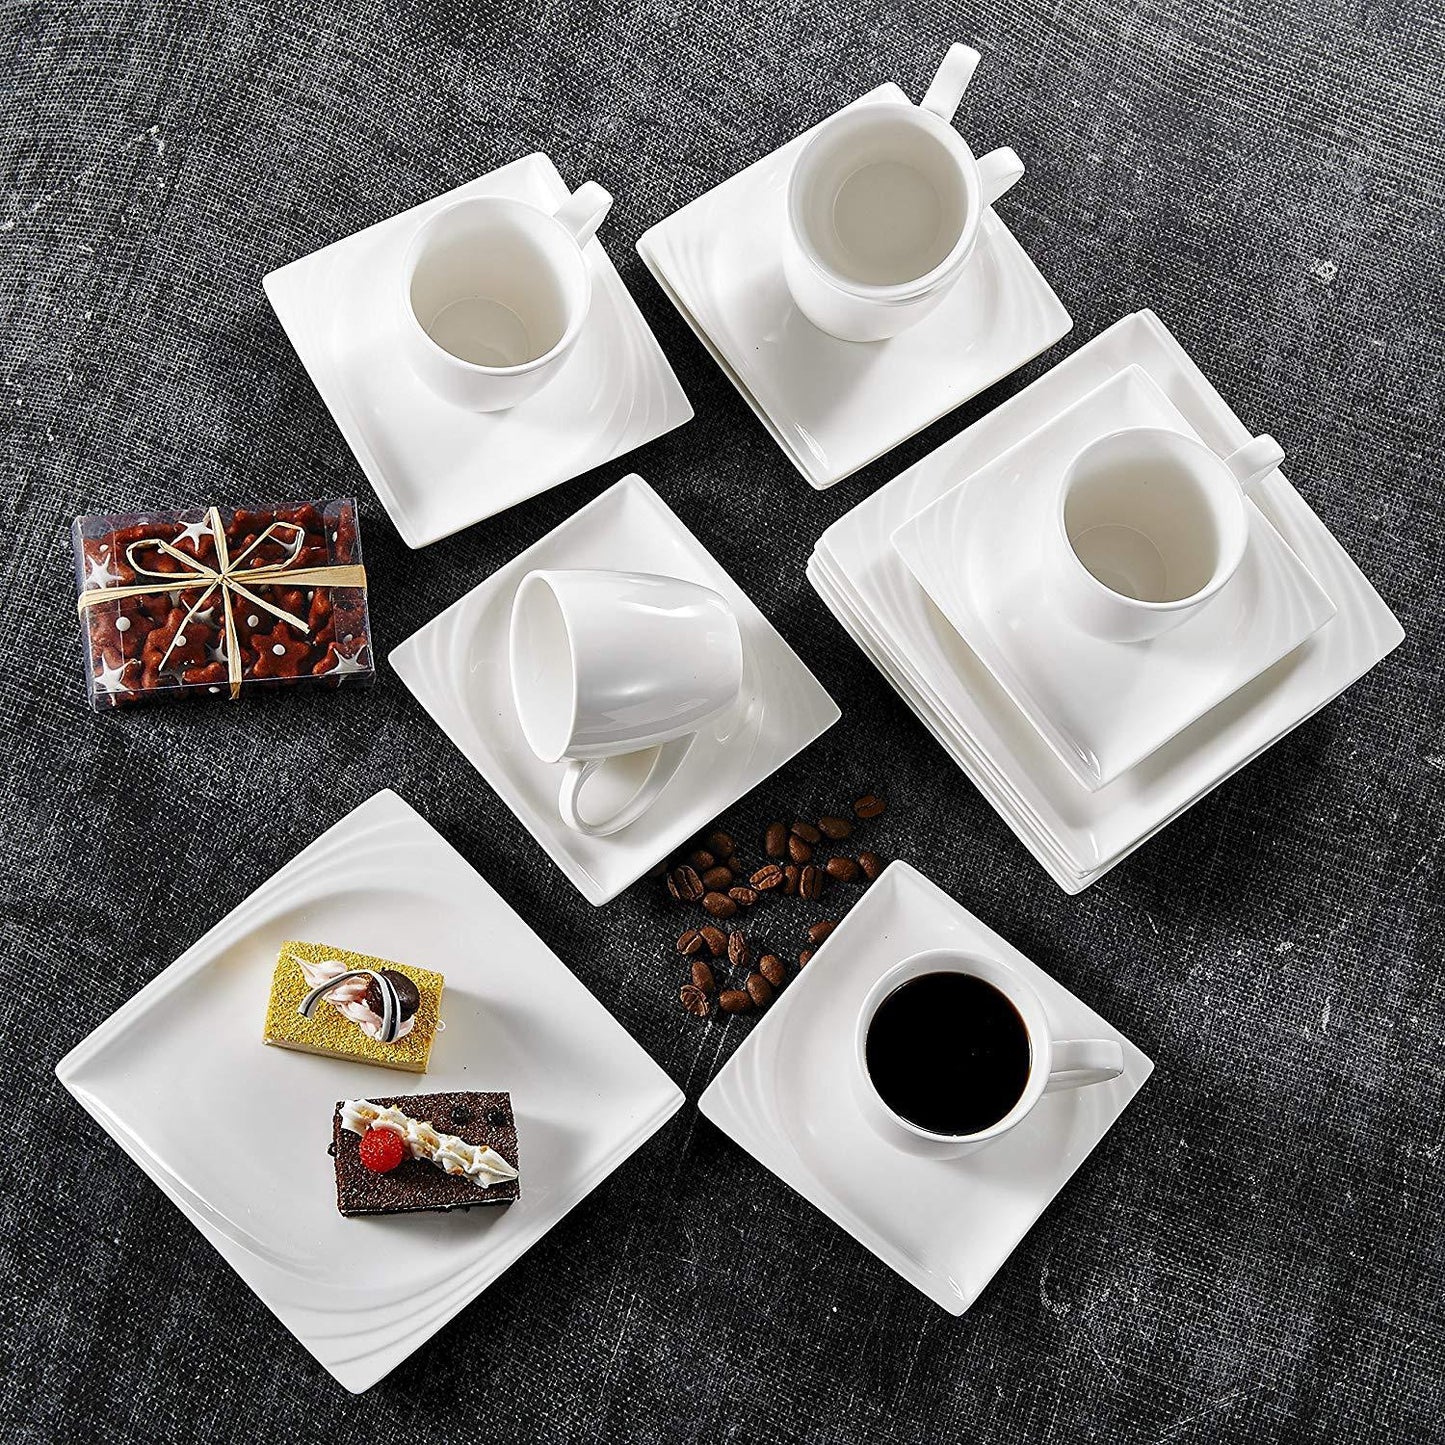 Monica 18-Piece White Ceramic Porcelain Dinnerware Set with Teacups Saucers and Dessert Plates for 6person - Nordic Side - 18, and, Ceramic, Coffee, Dessert, Dinnerware, for, Malacasa, Monica